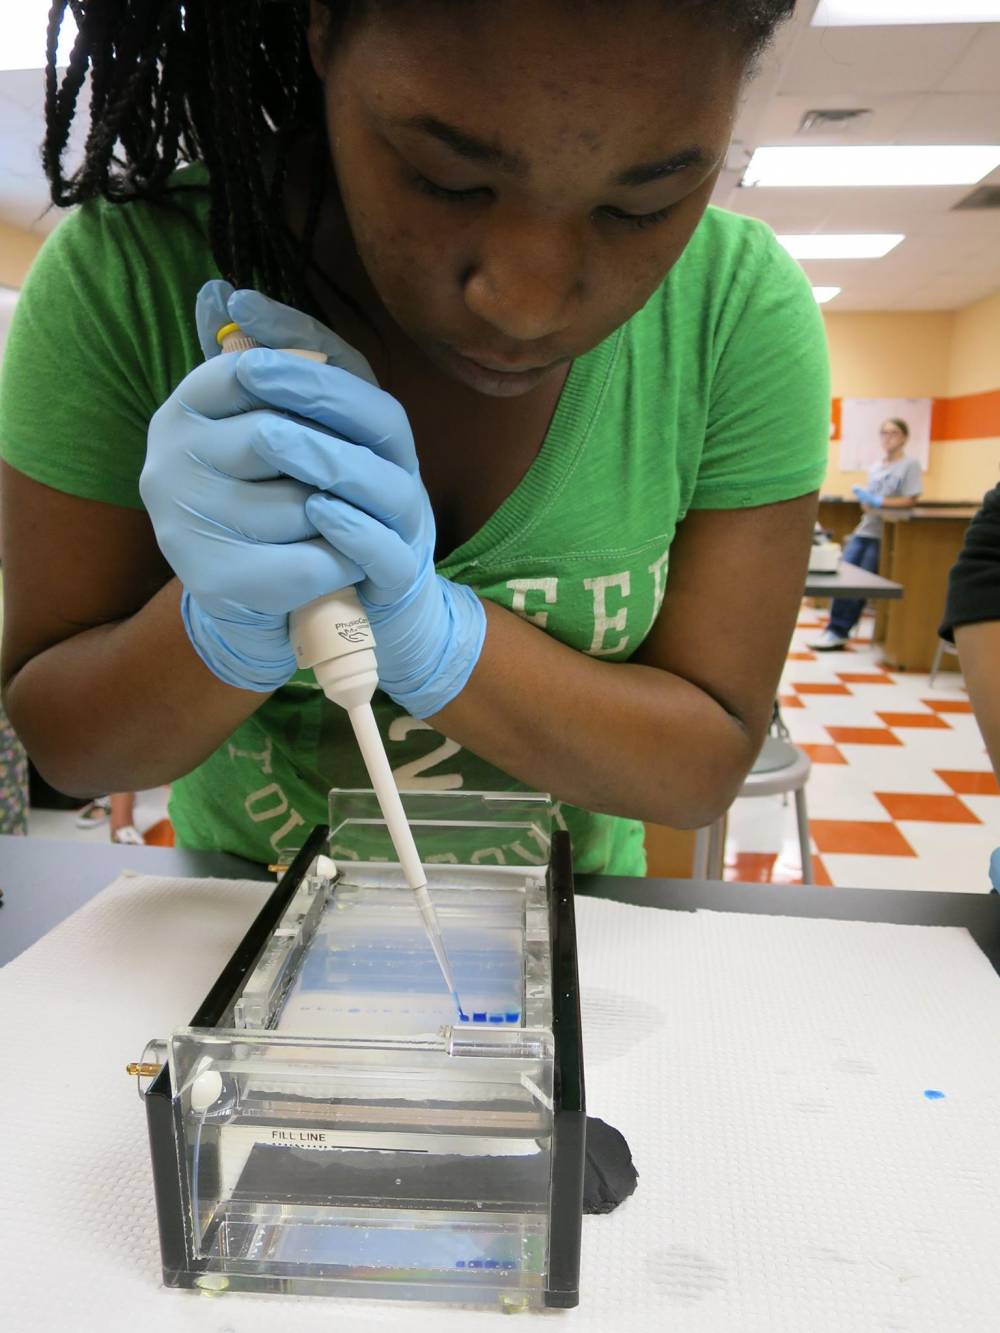 TOP SOUTH CAROLINA ACADEMIC CAMP: Clemson University Summer Science Camps is a Top Academic Summer Camp located in Clemson South Carolina offering many fun and enriching Academic and other camp programs. 